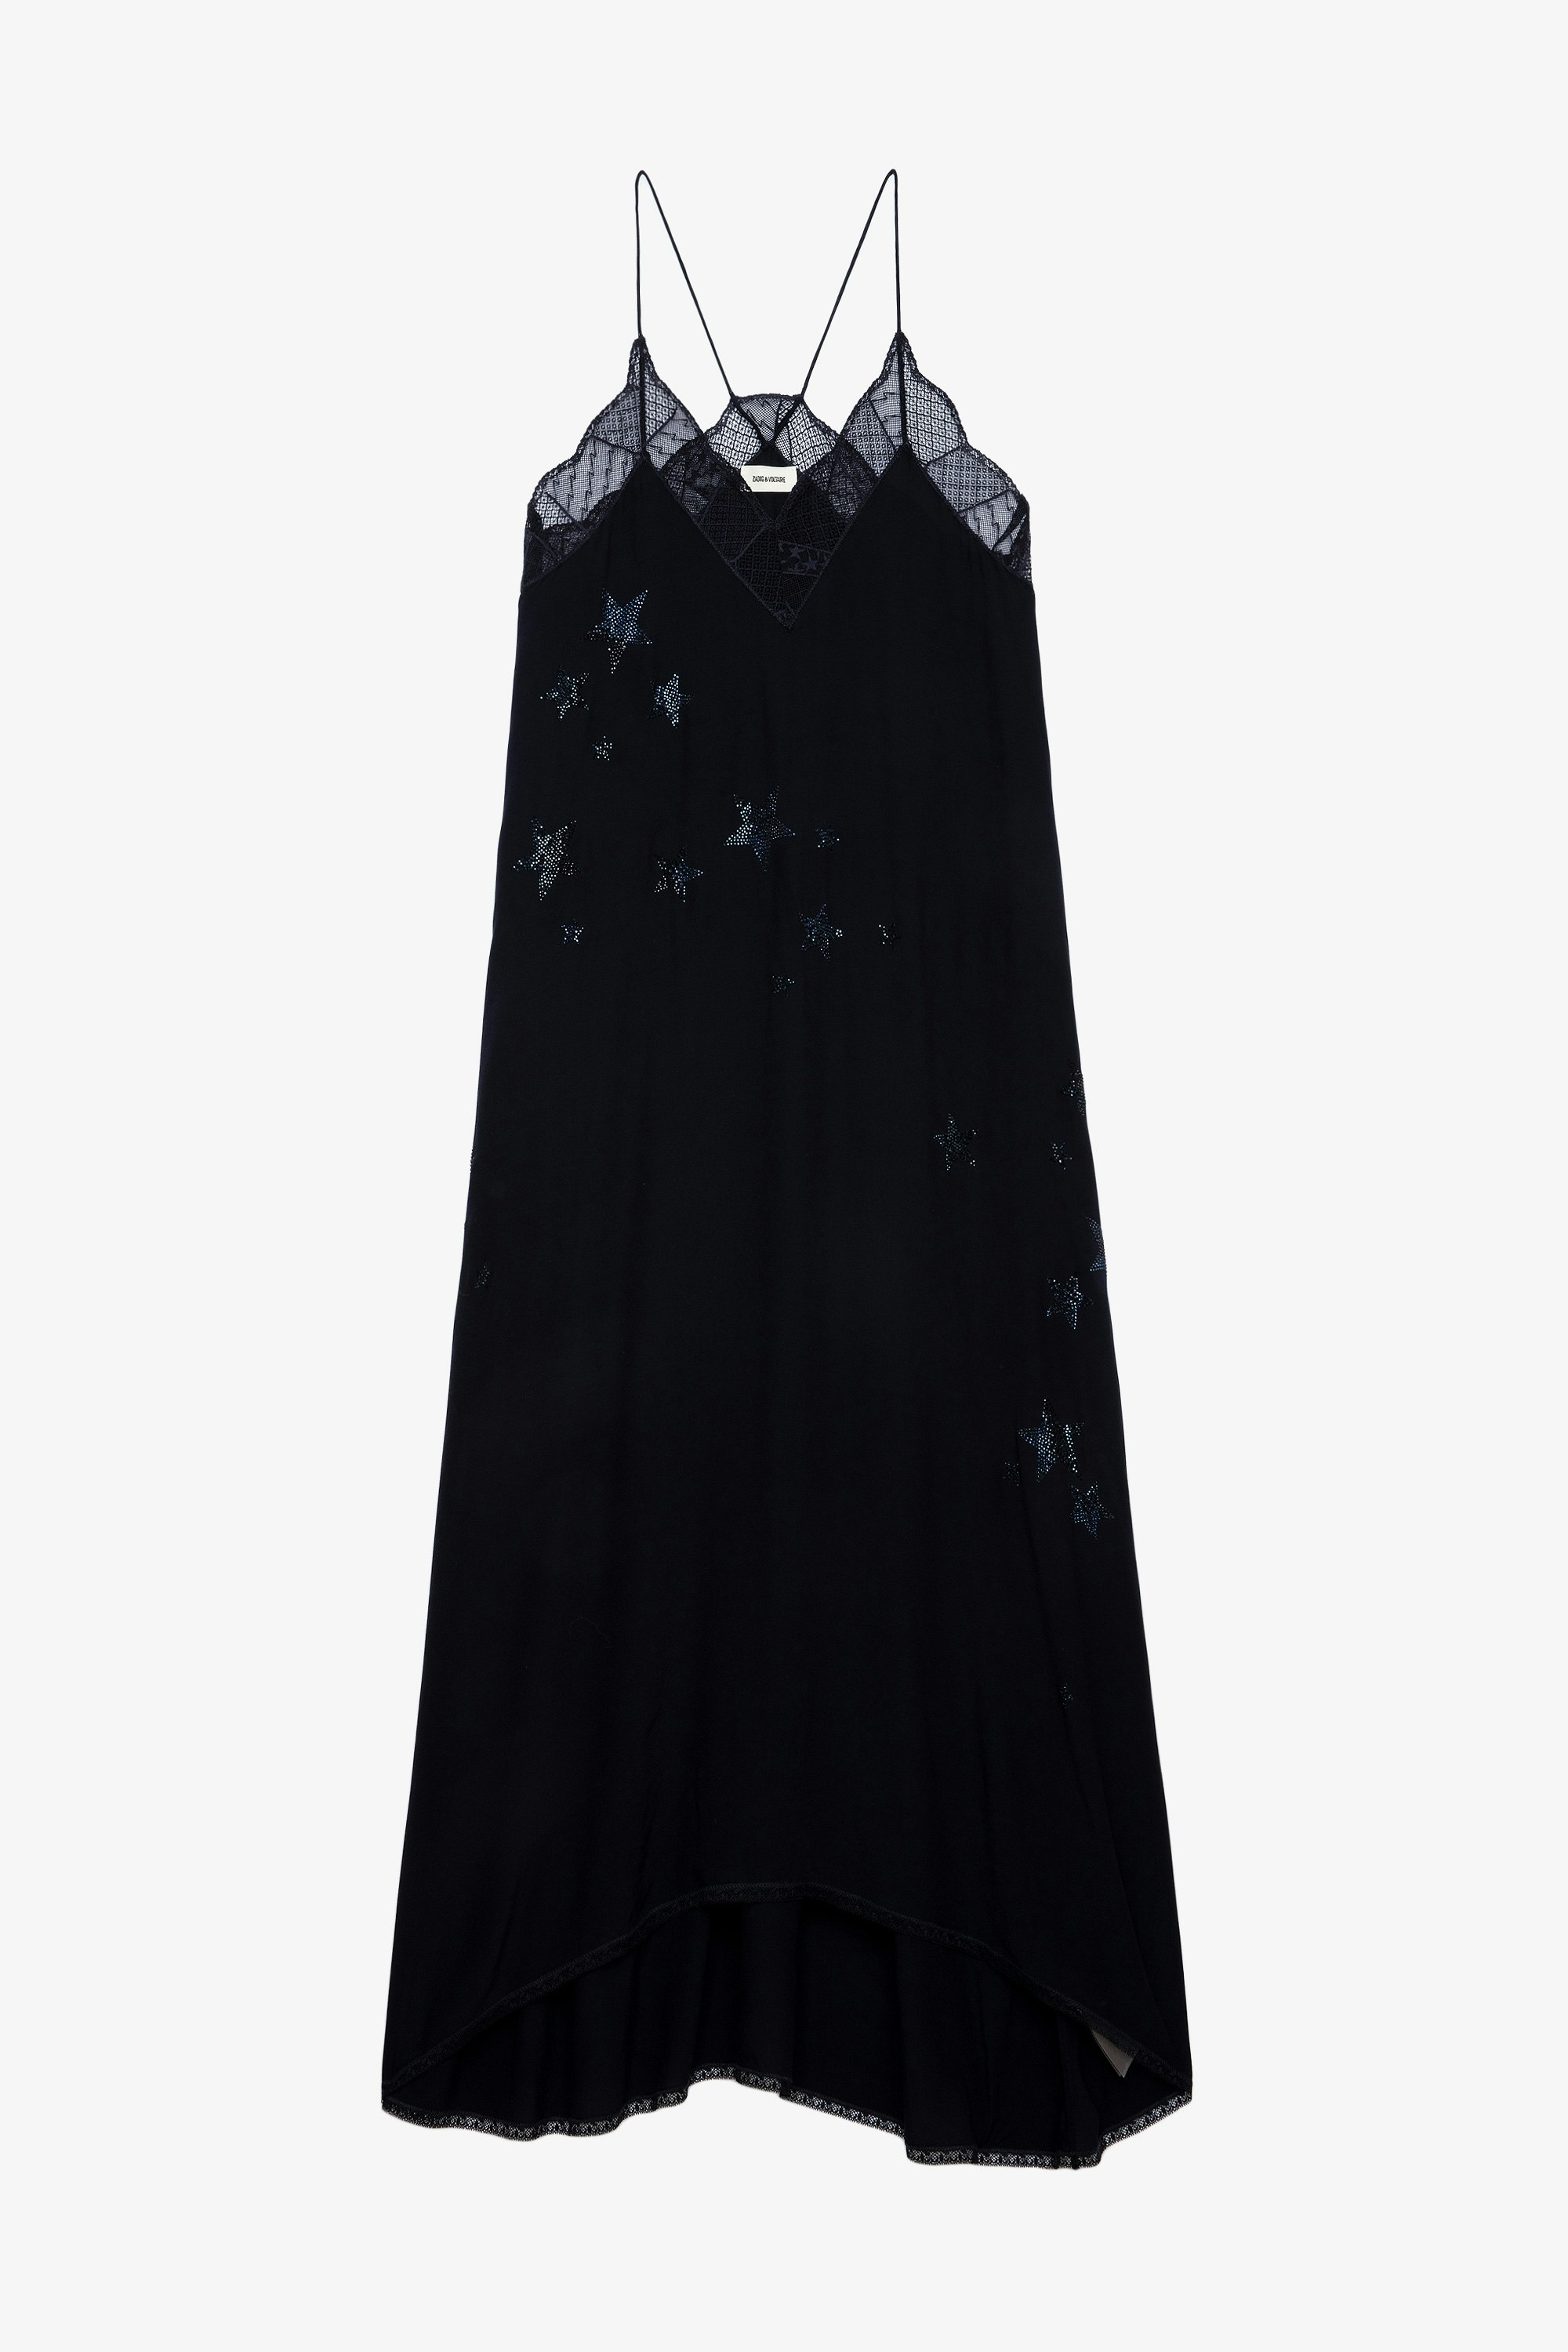 Risty Soft Diamanté Stars ドレス Women’s navy blue long dress with lace trim and studded with crystal-embellished stars